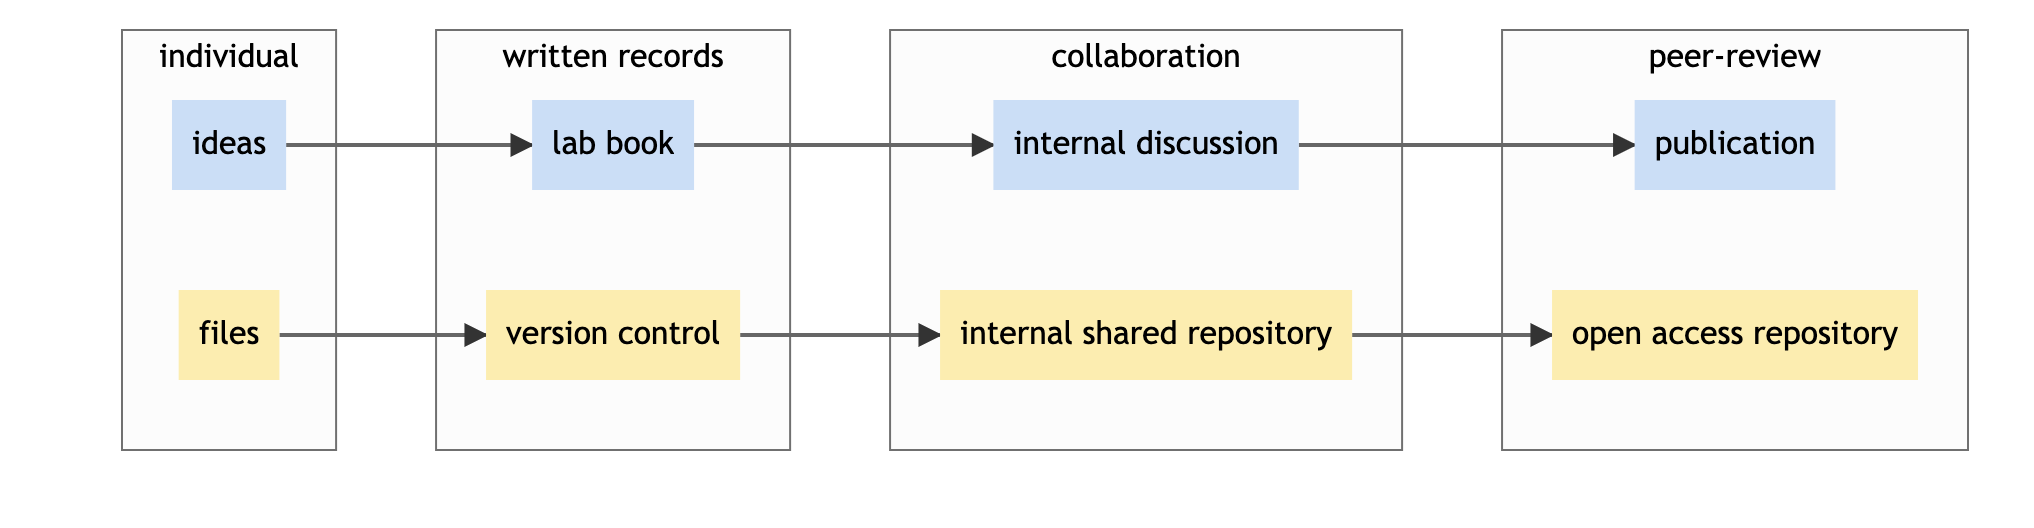 similarity between publication and repository use